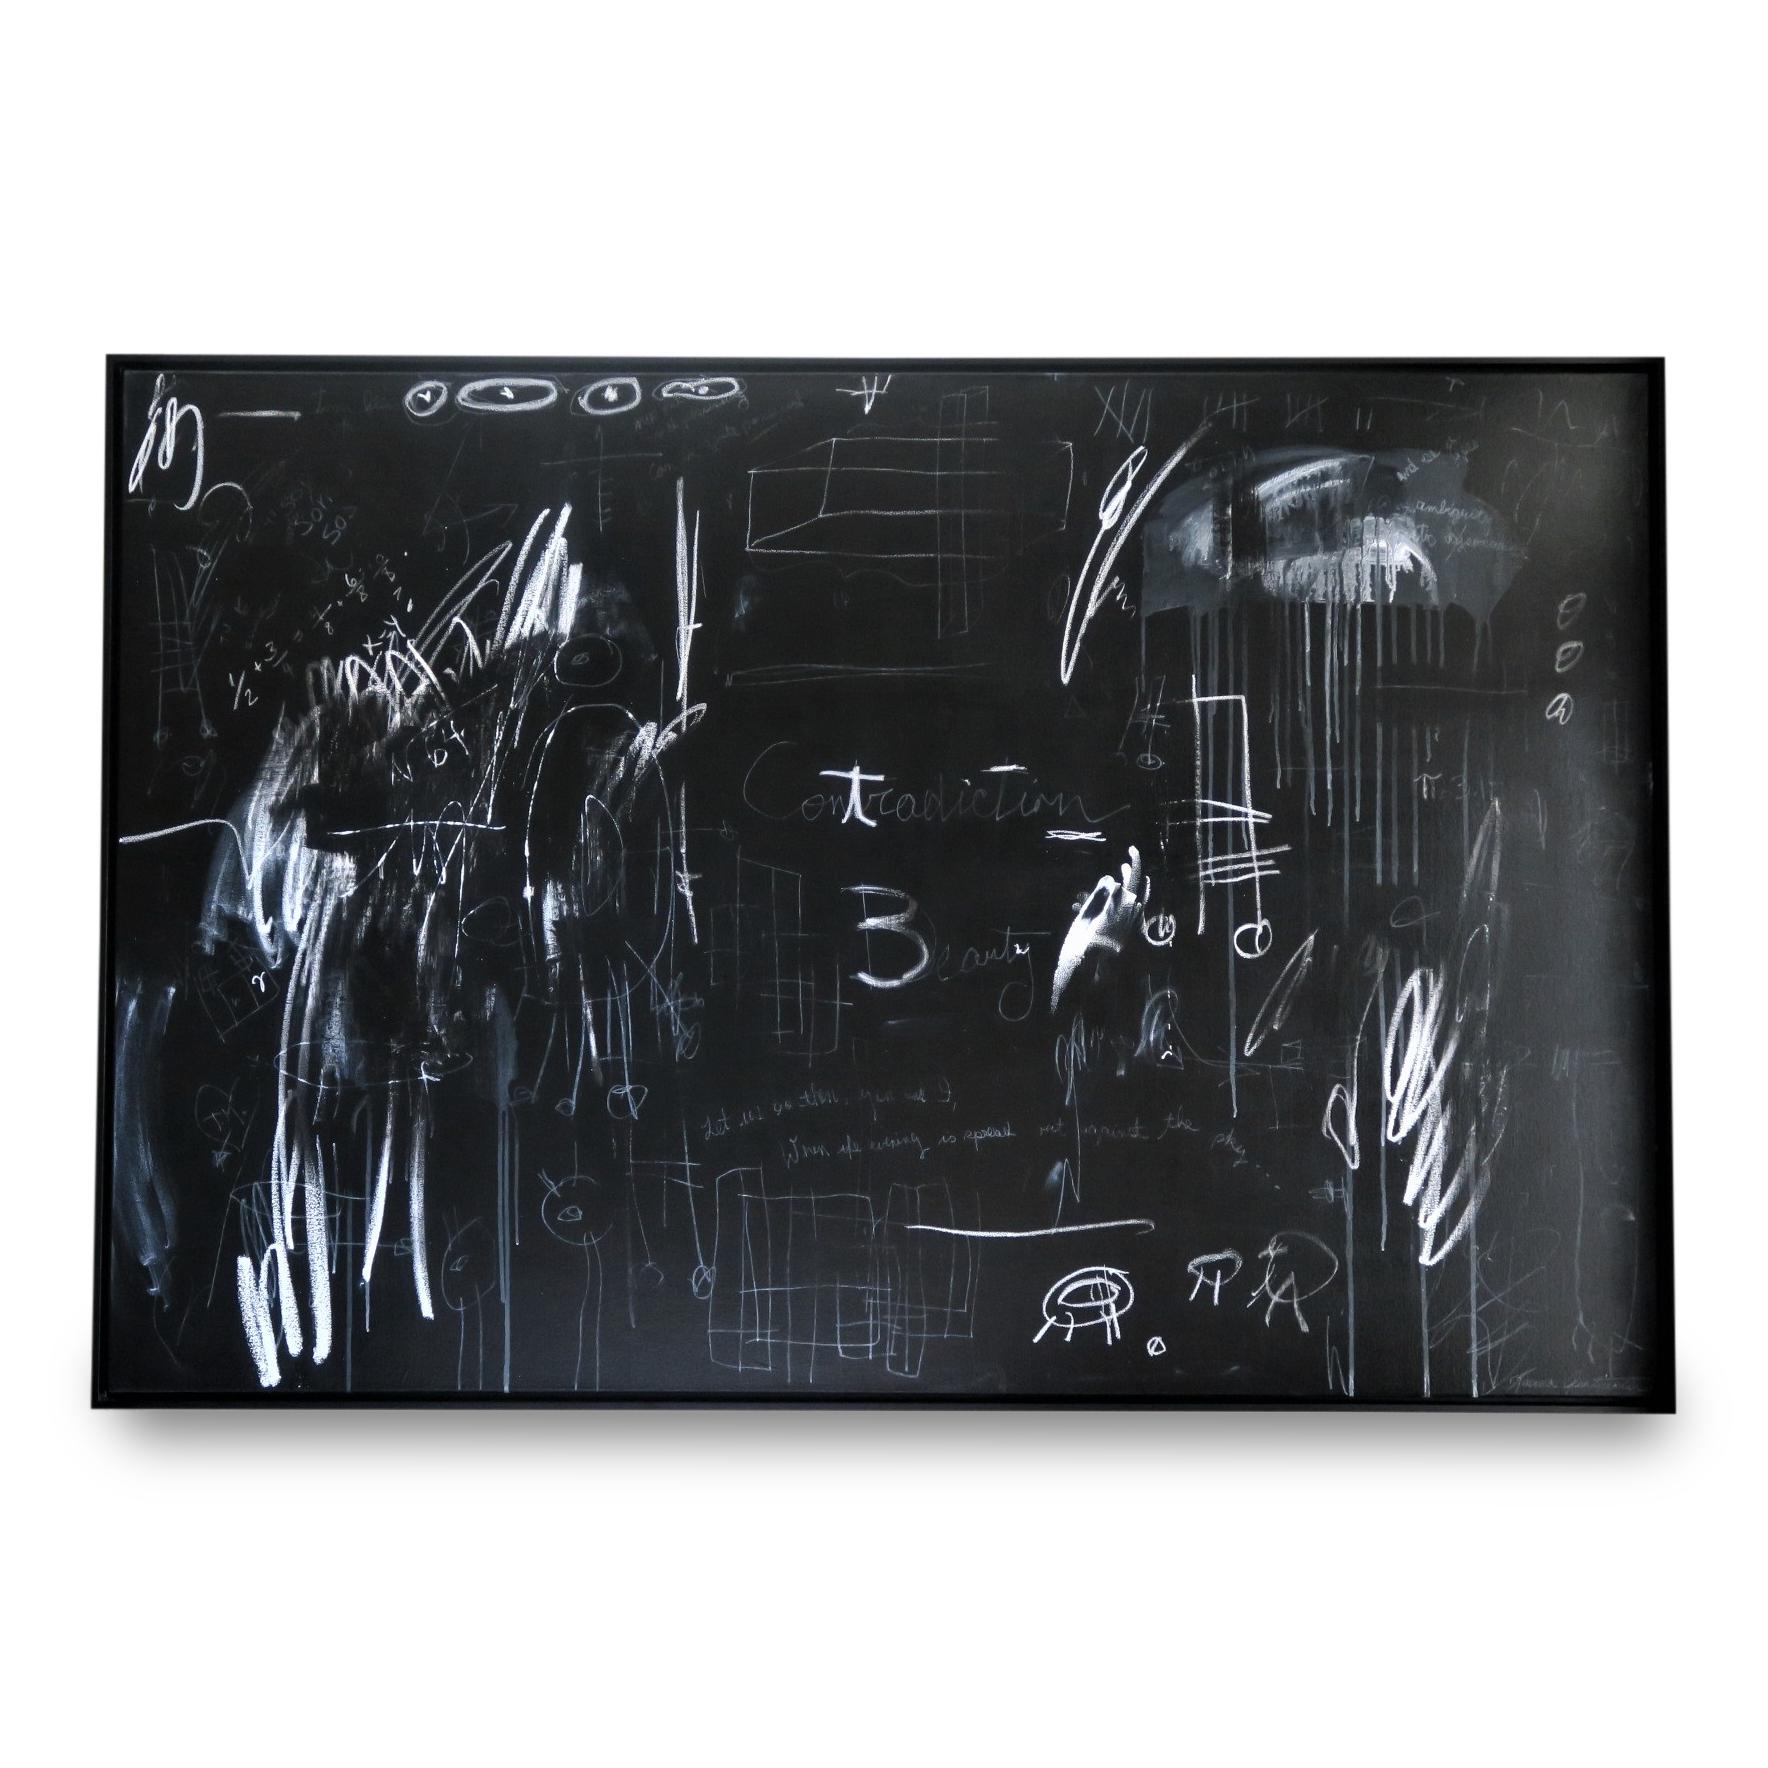 Karina Gentinetta Abstract Painting - "Time Flies" Black and White Painting with Pencils and Oil Pastels, 48"x72"